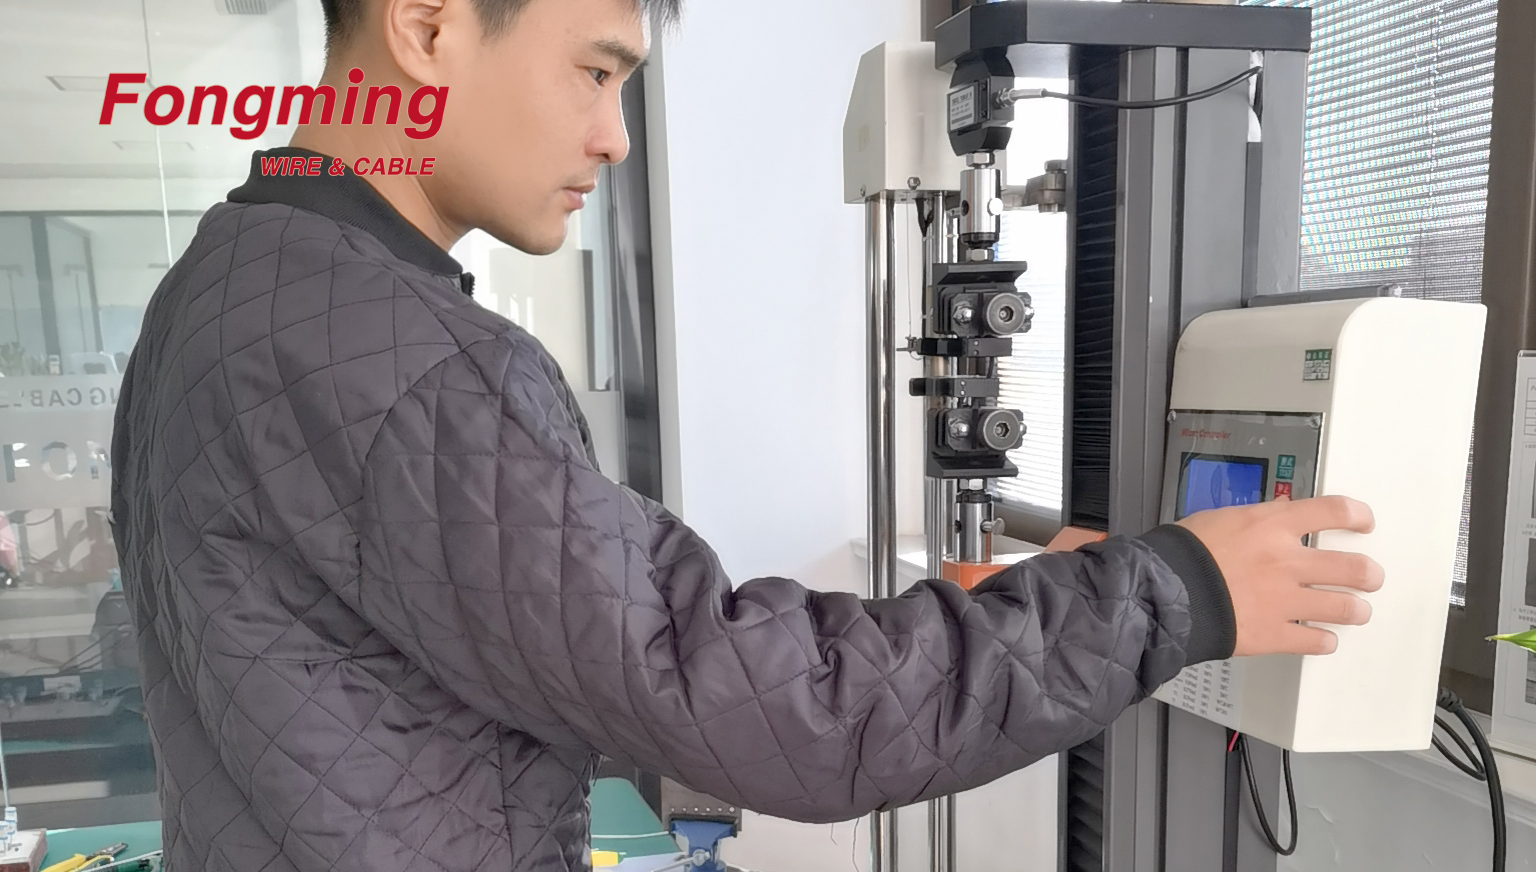 Fongming Cable：How to conduct insulation test for wires and cables